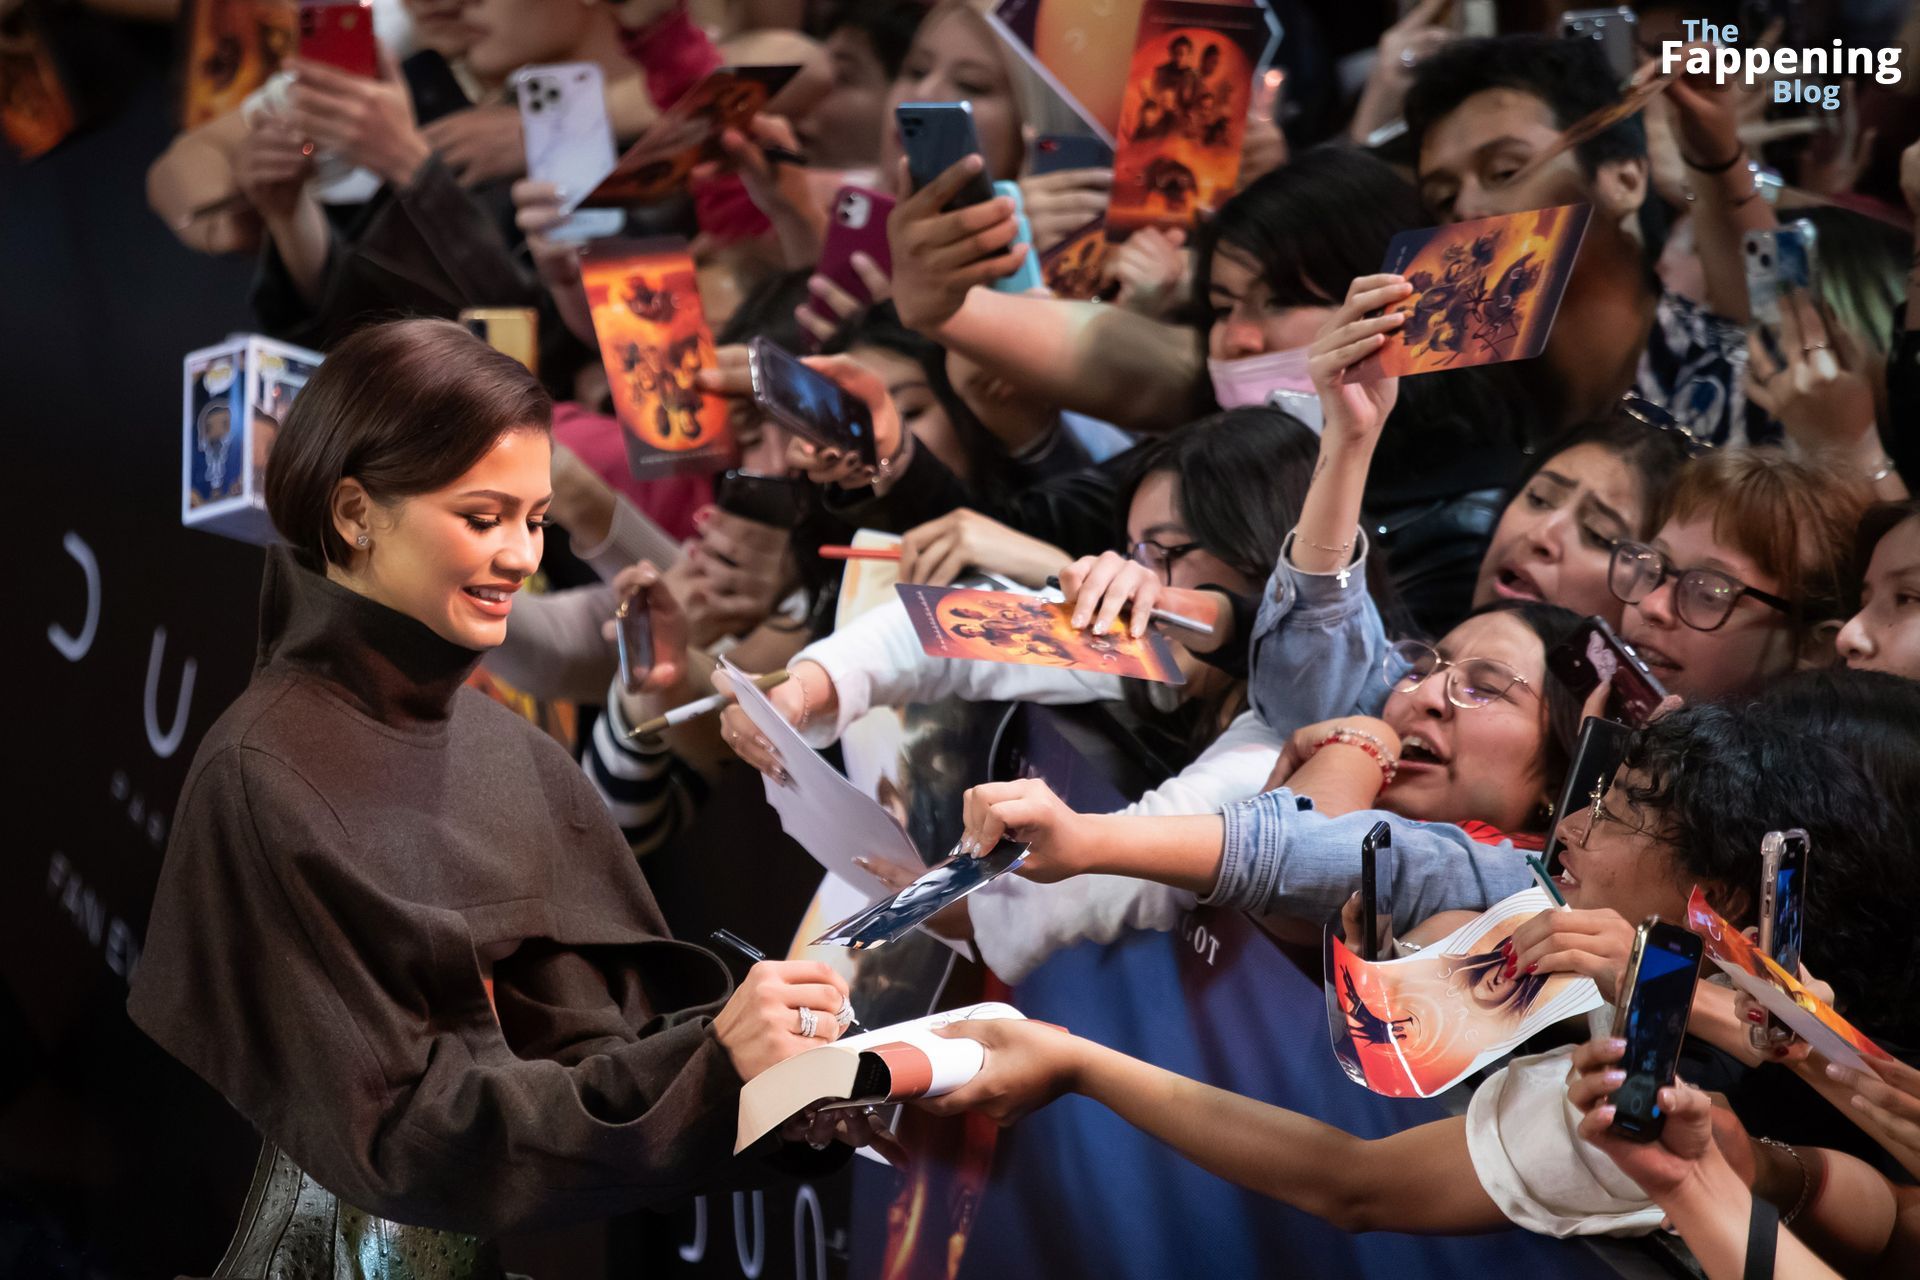 Zendaya Shows Off Her Underboob at the “Dune: Part Two” Event in Mexico City (76 Photos)